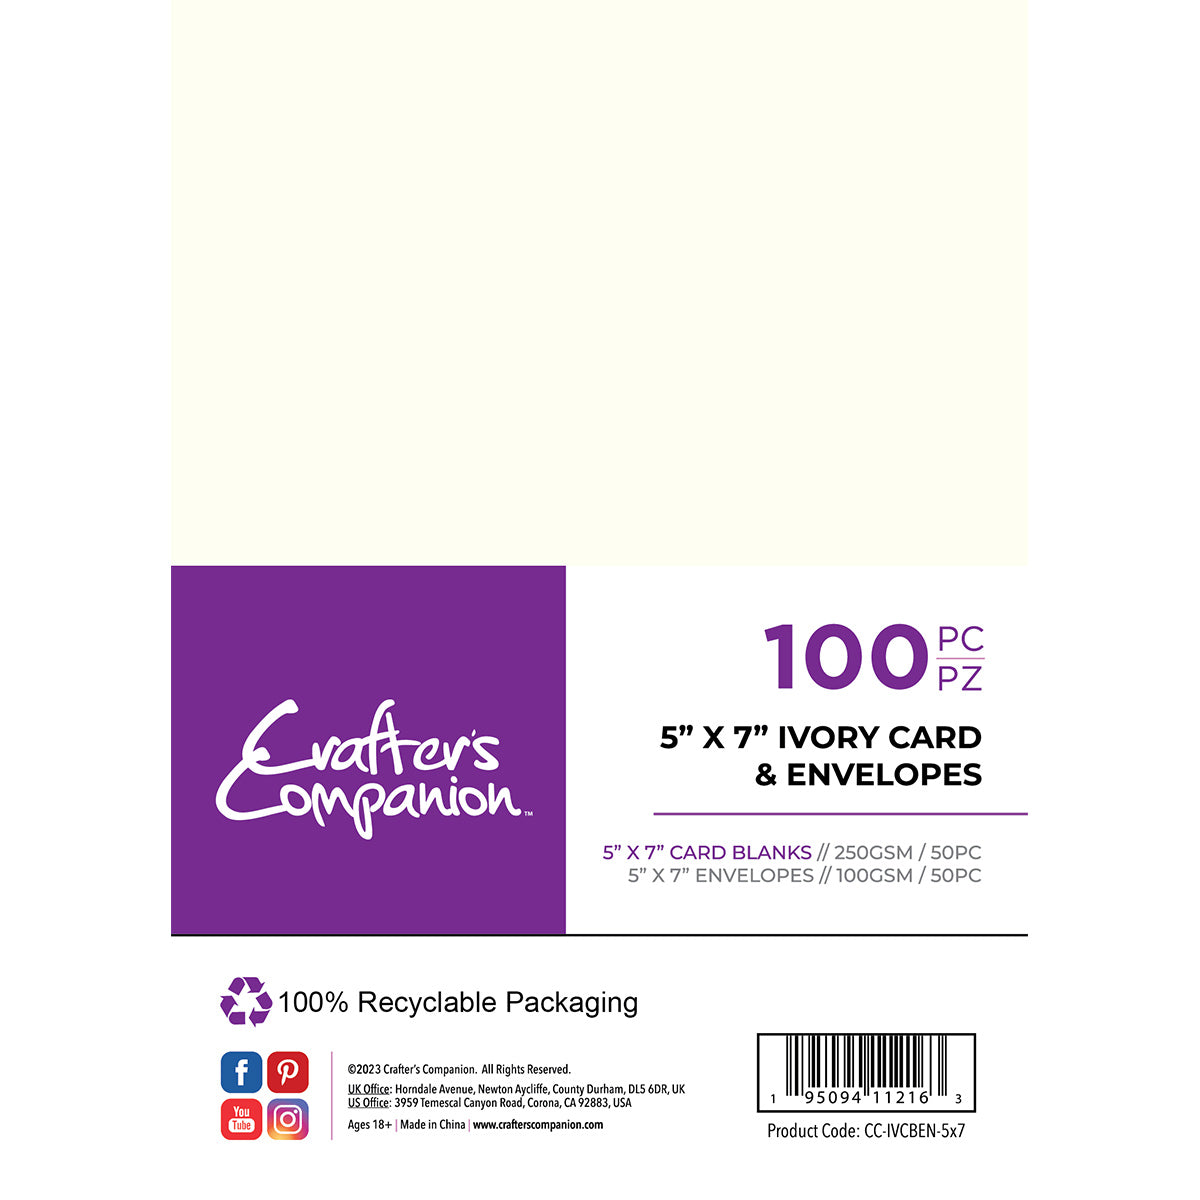 Crafter's Companion - 5" x 7" Cards & Envelopes 100 piece - Ivory